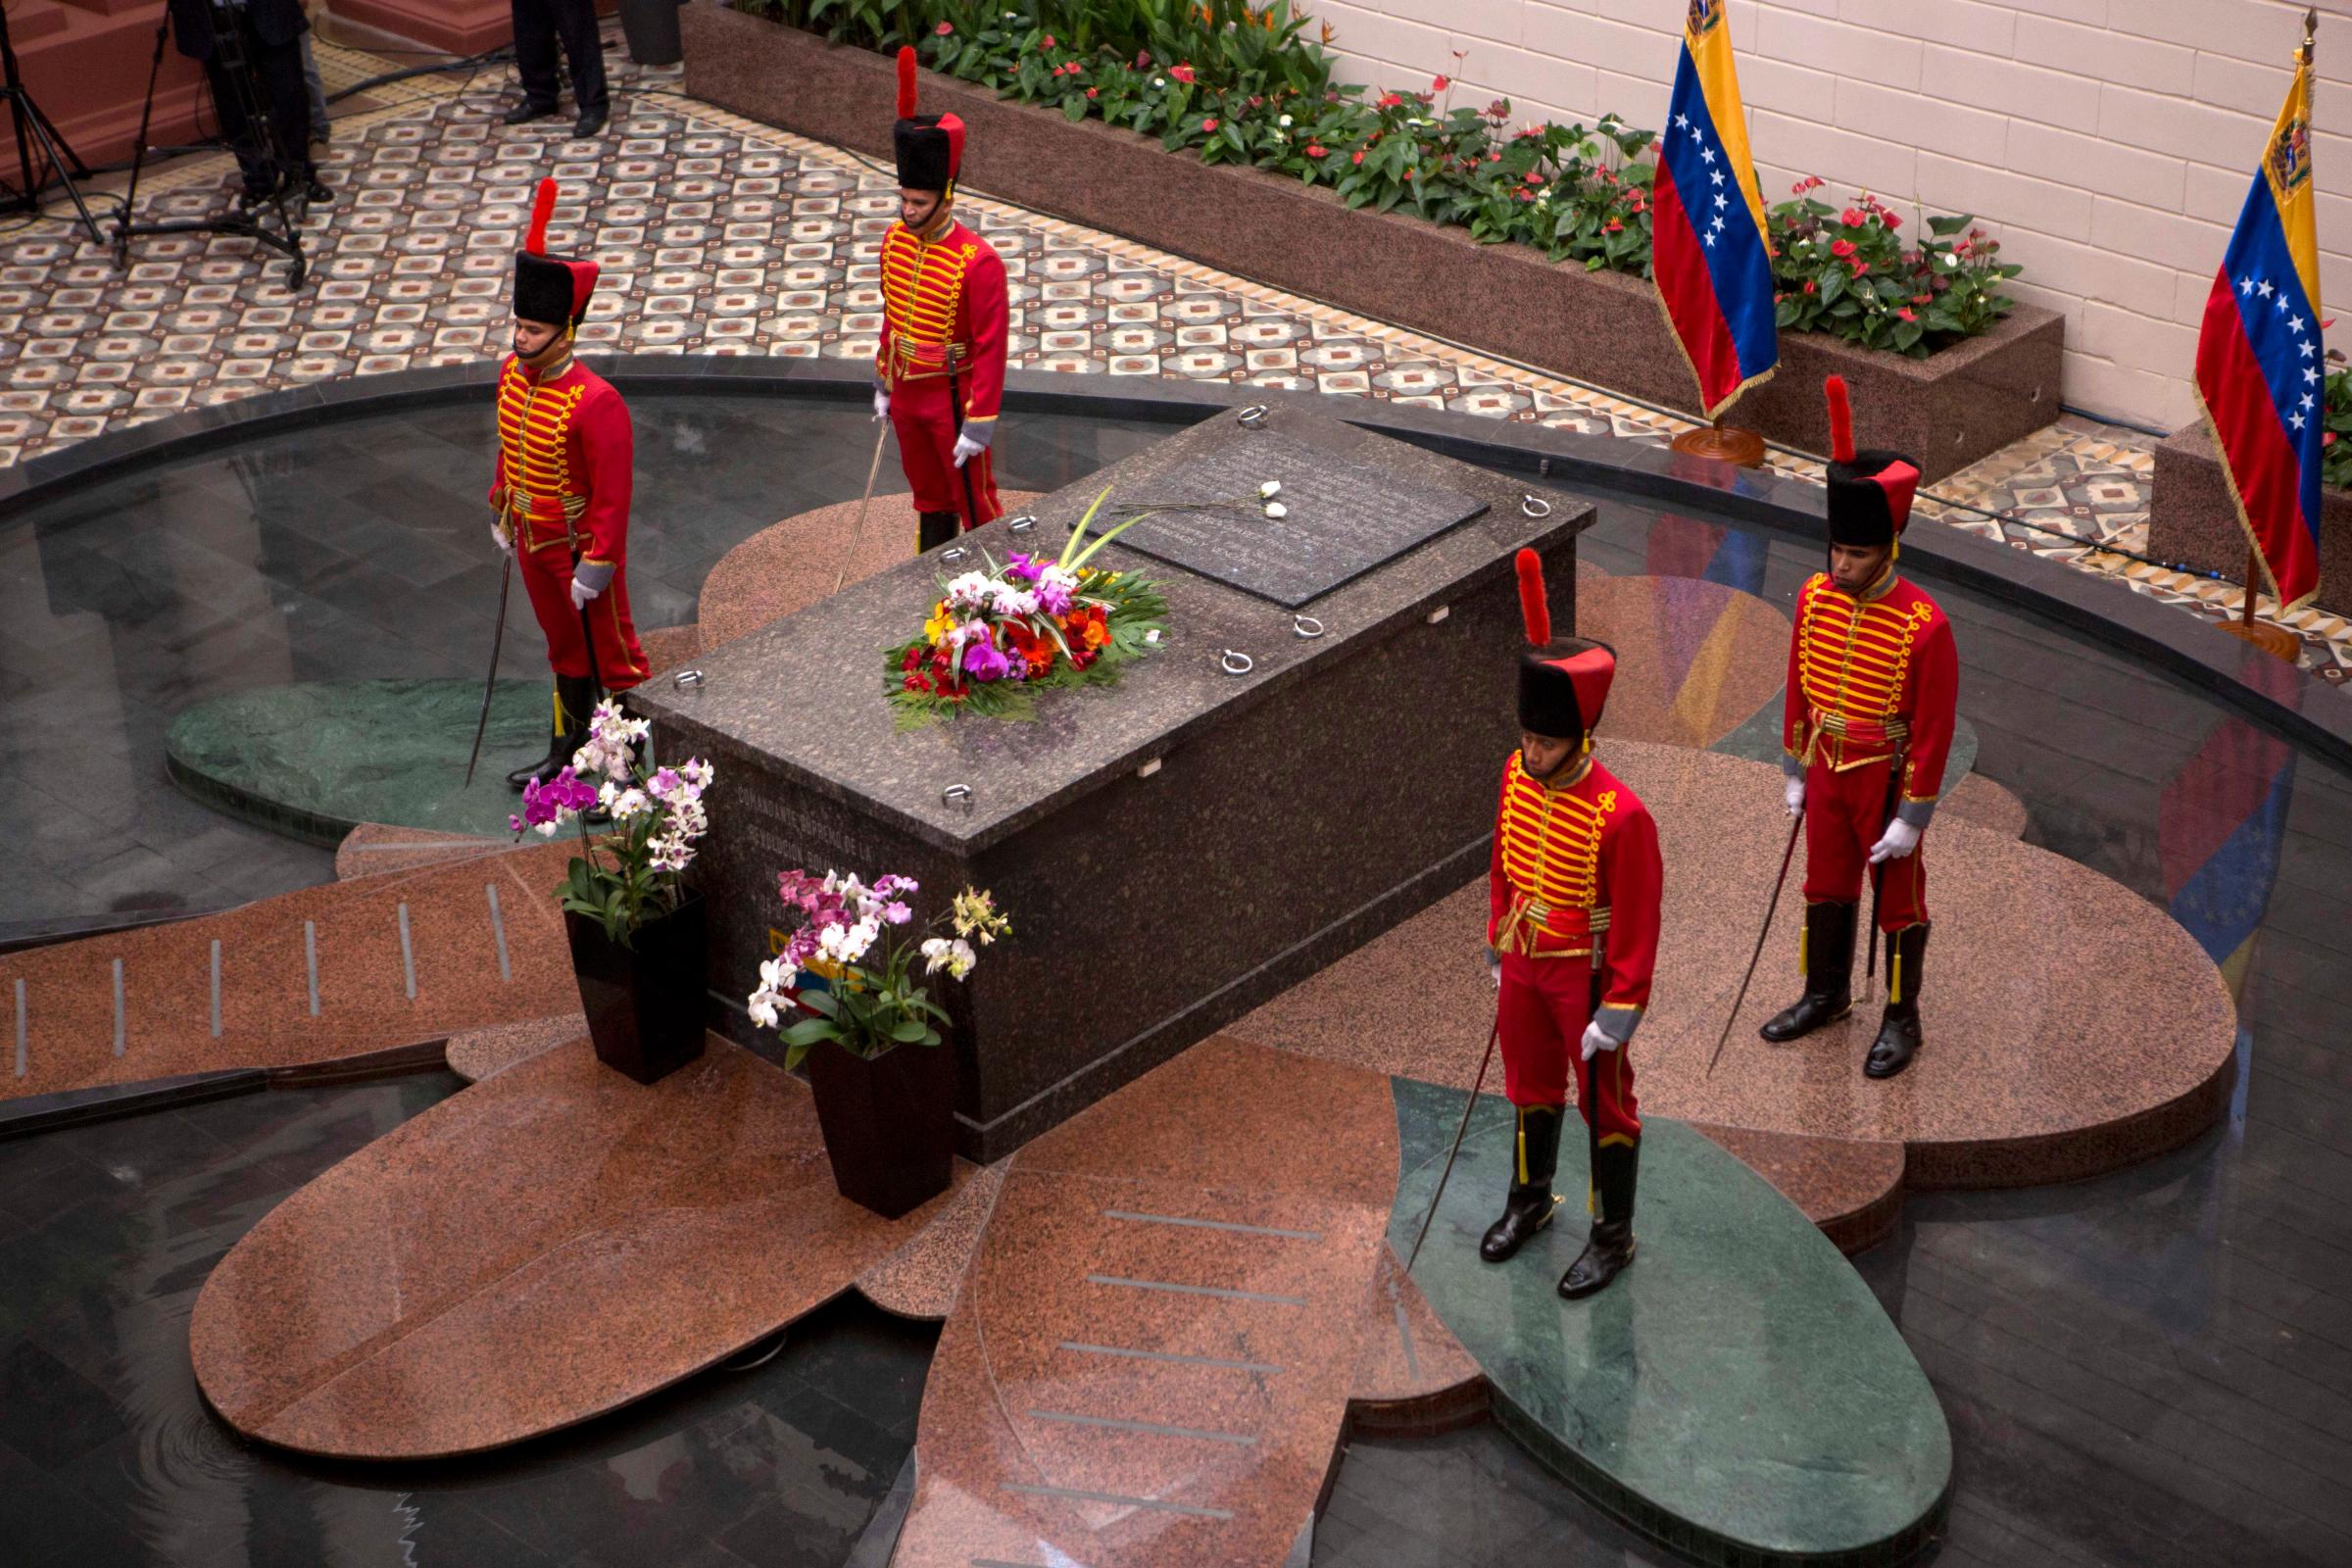 Presidential guards stand next to the tomb of Venezuela's late President Hugo Chavez at the former military barracks that was turned into Chavez's mausoleum in Caracas, March 5, 2014.